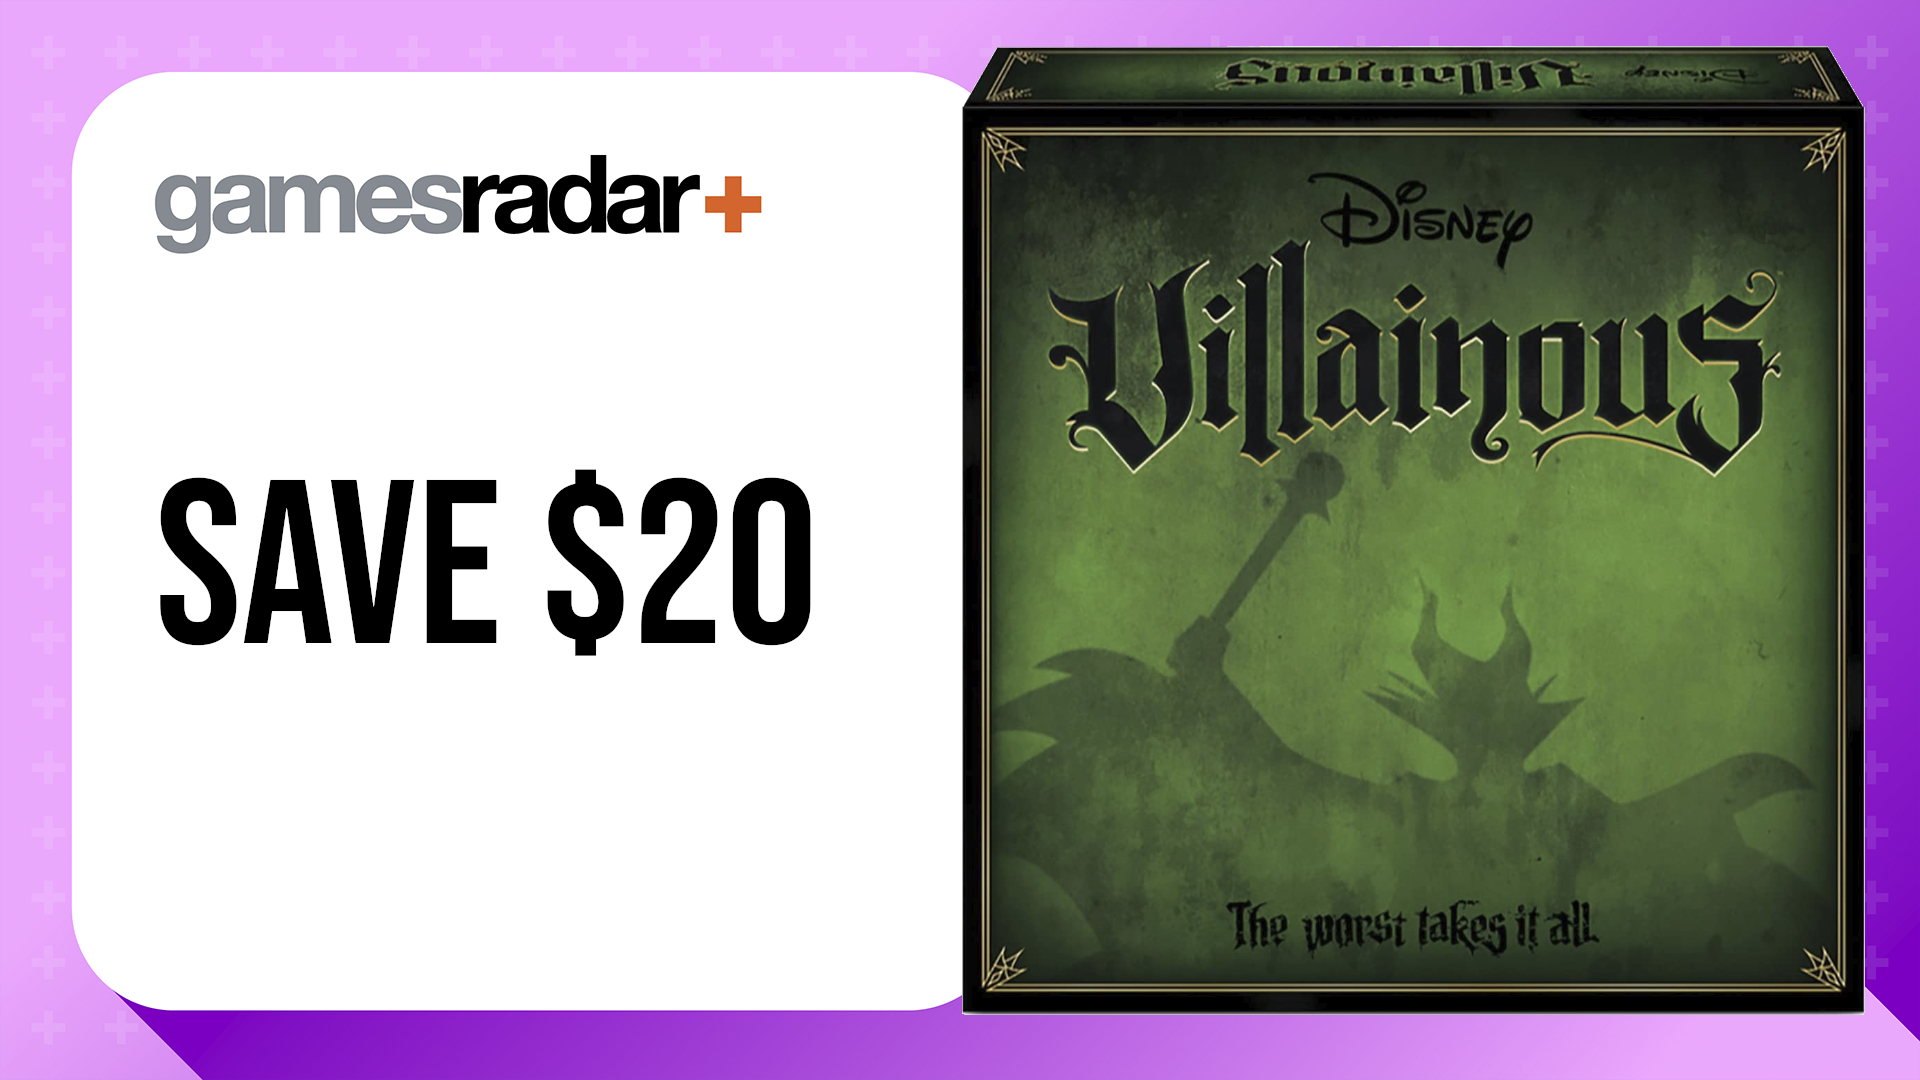 Black Friday board game deals with Disney Villainous